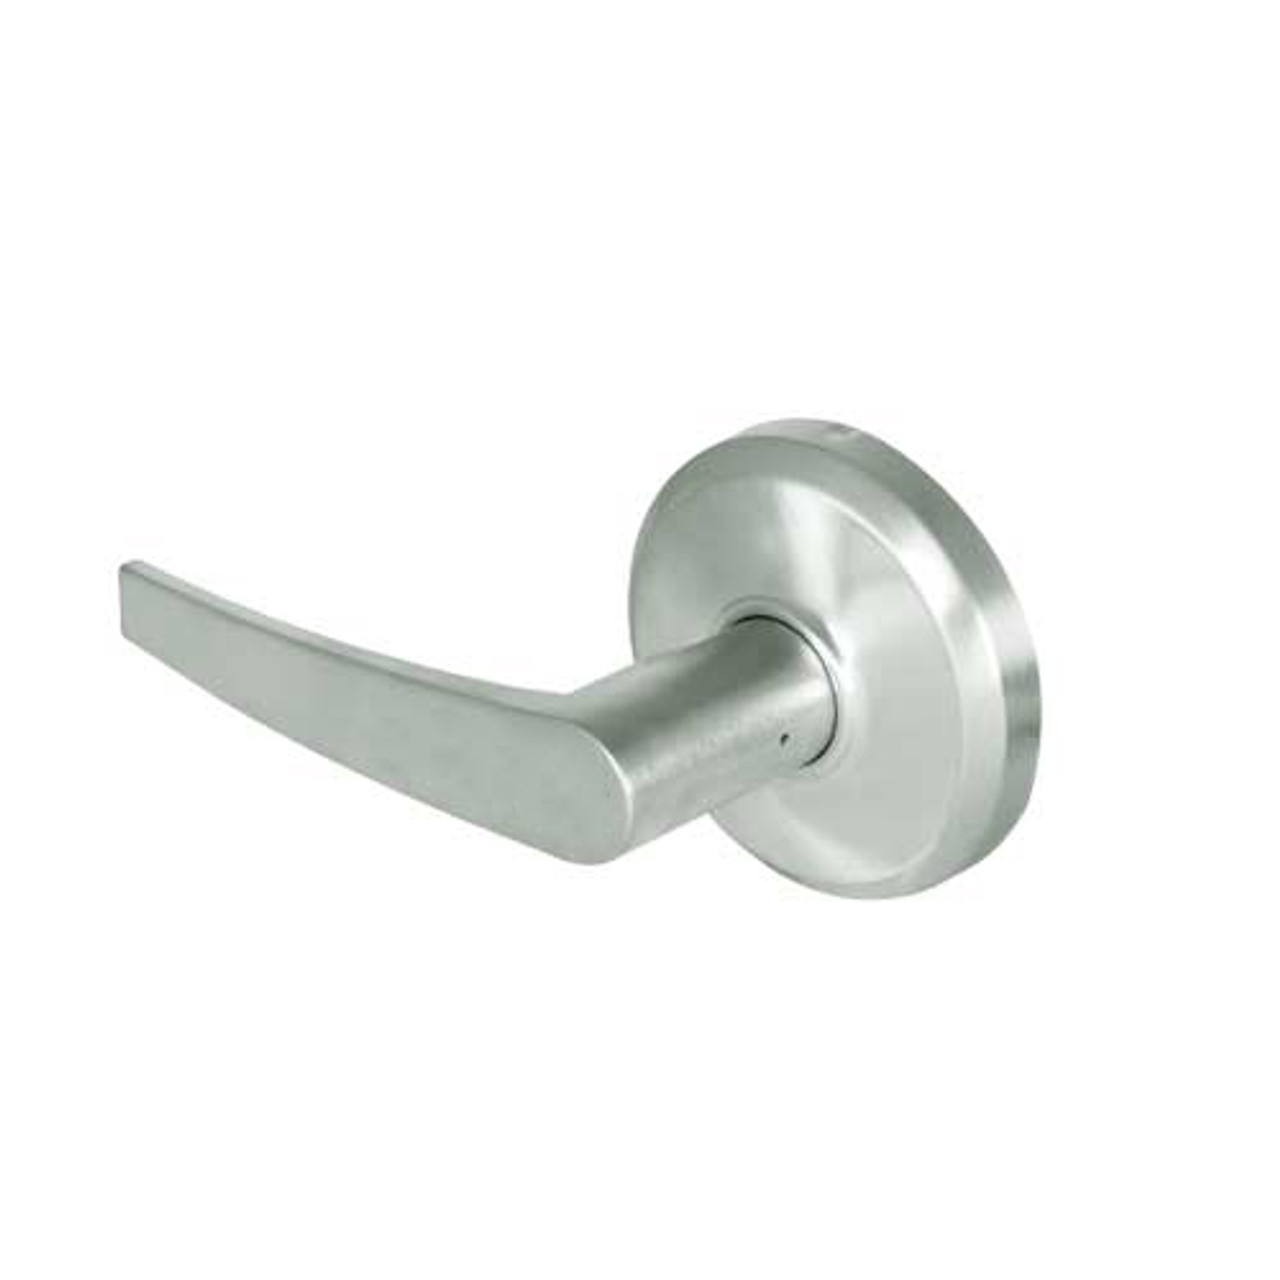 QCL235A619FR4NOS Stanley QCL200 Series Cylindrical Communicating Lock with Slate Lever in Satin Nickel Finish